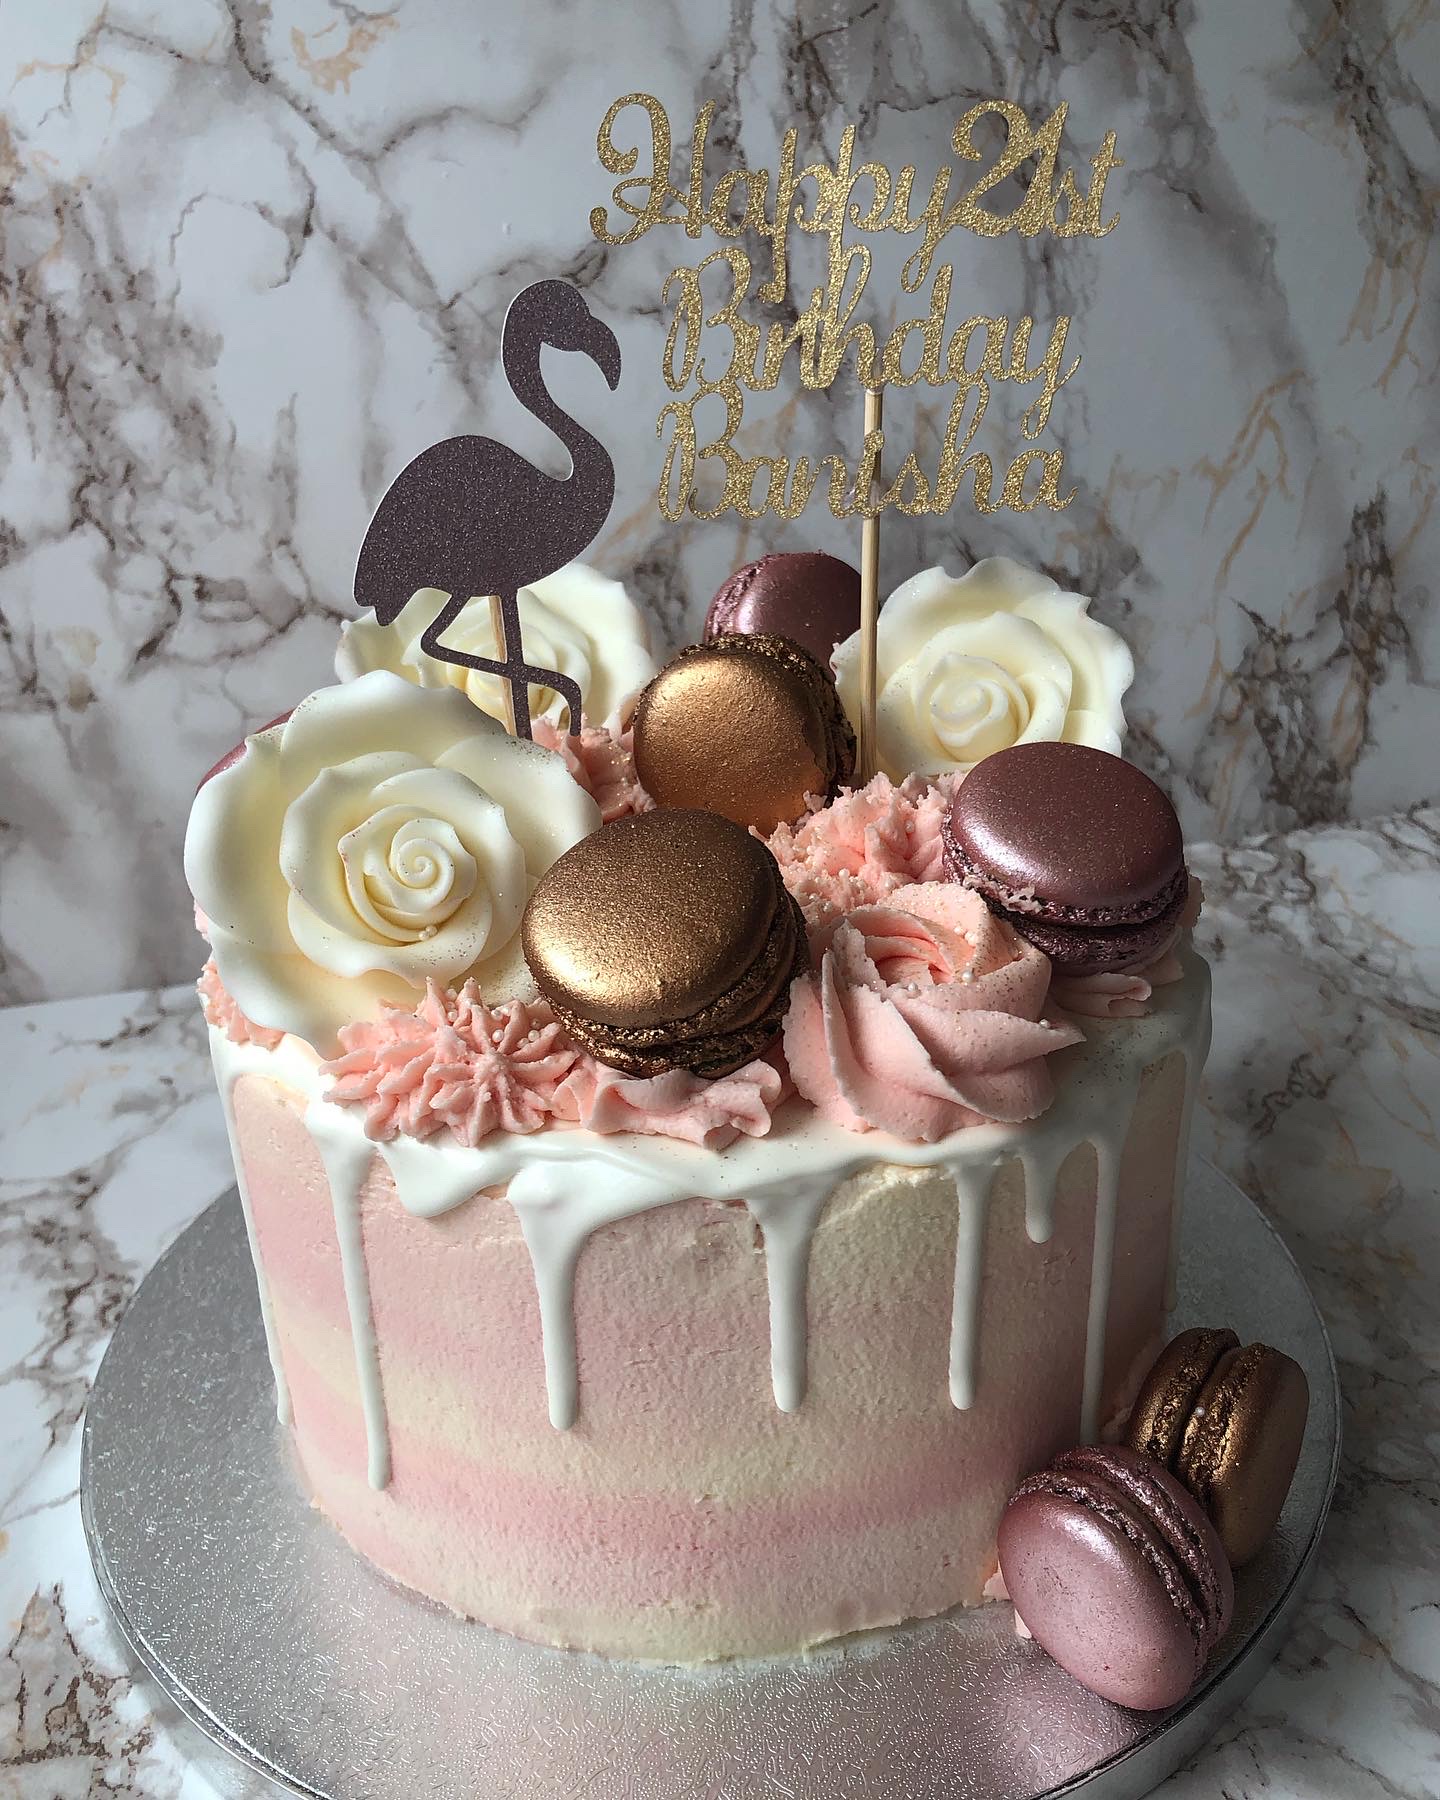 Sweet Life - Cakes by Amber - Feeling 22 💙 Red velvet cake to celebrate a  special birthday! With fault line finish, gold detailing, custom topper and  the most beautiful dried florals 😍 | Facebook